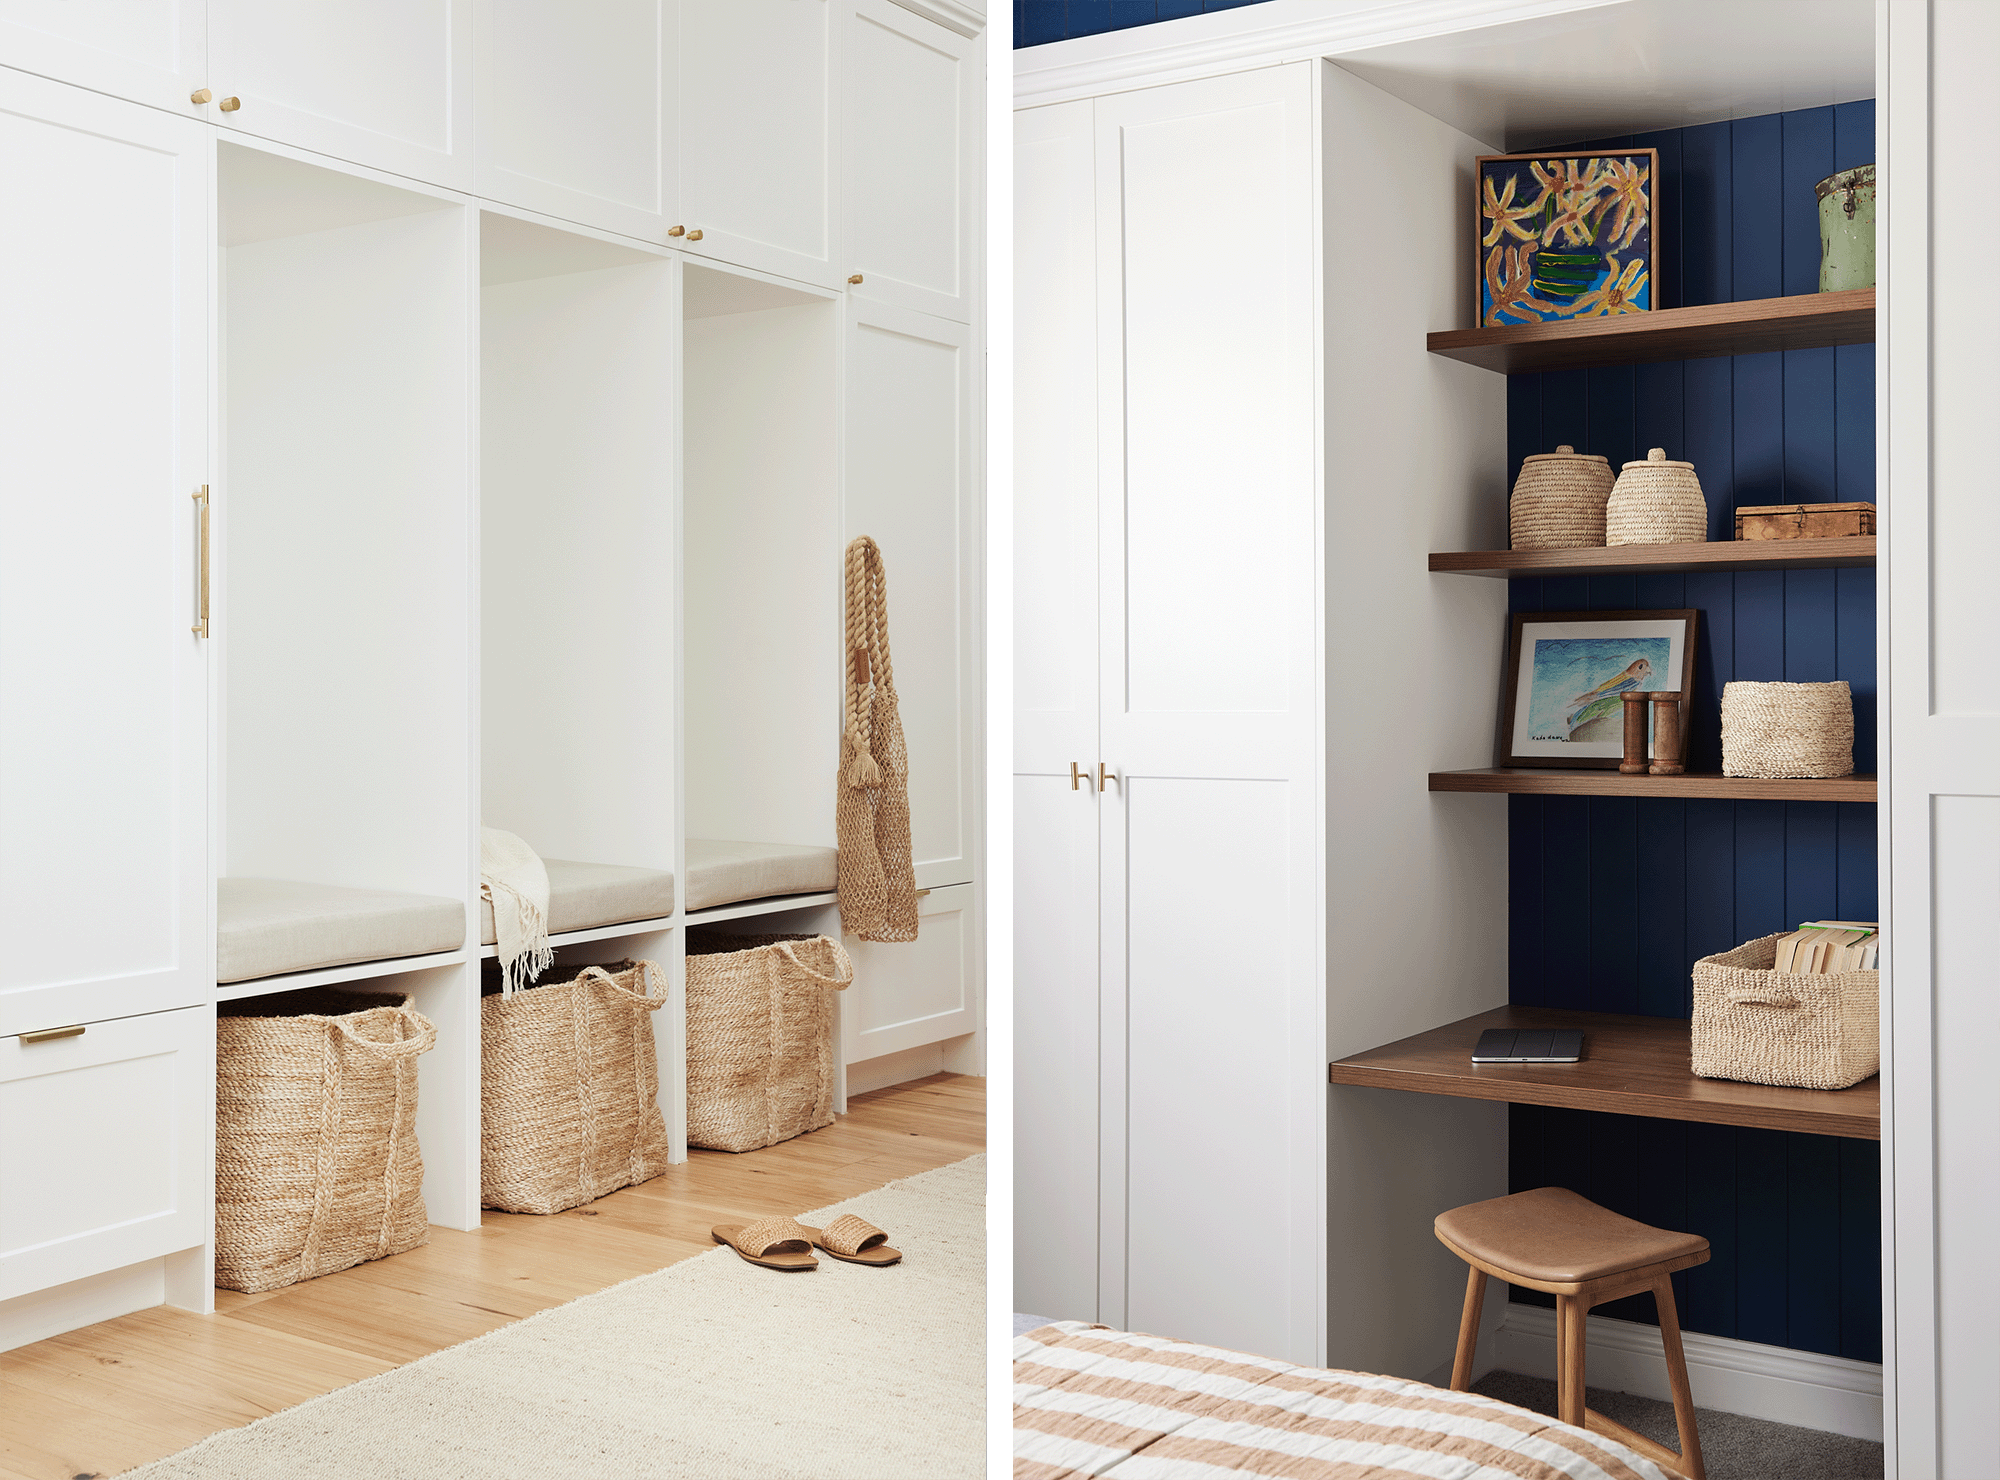 Mudroom with white cabinetry and jute baskets and open shelving with baskets on open shelving